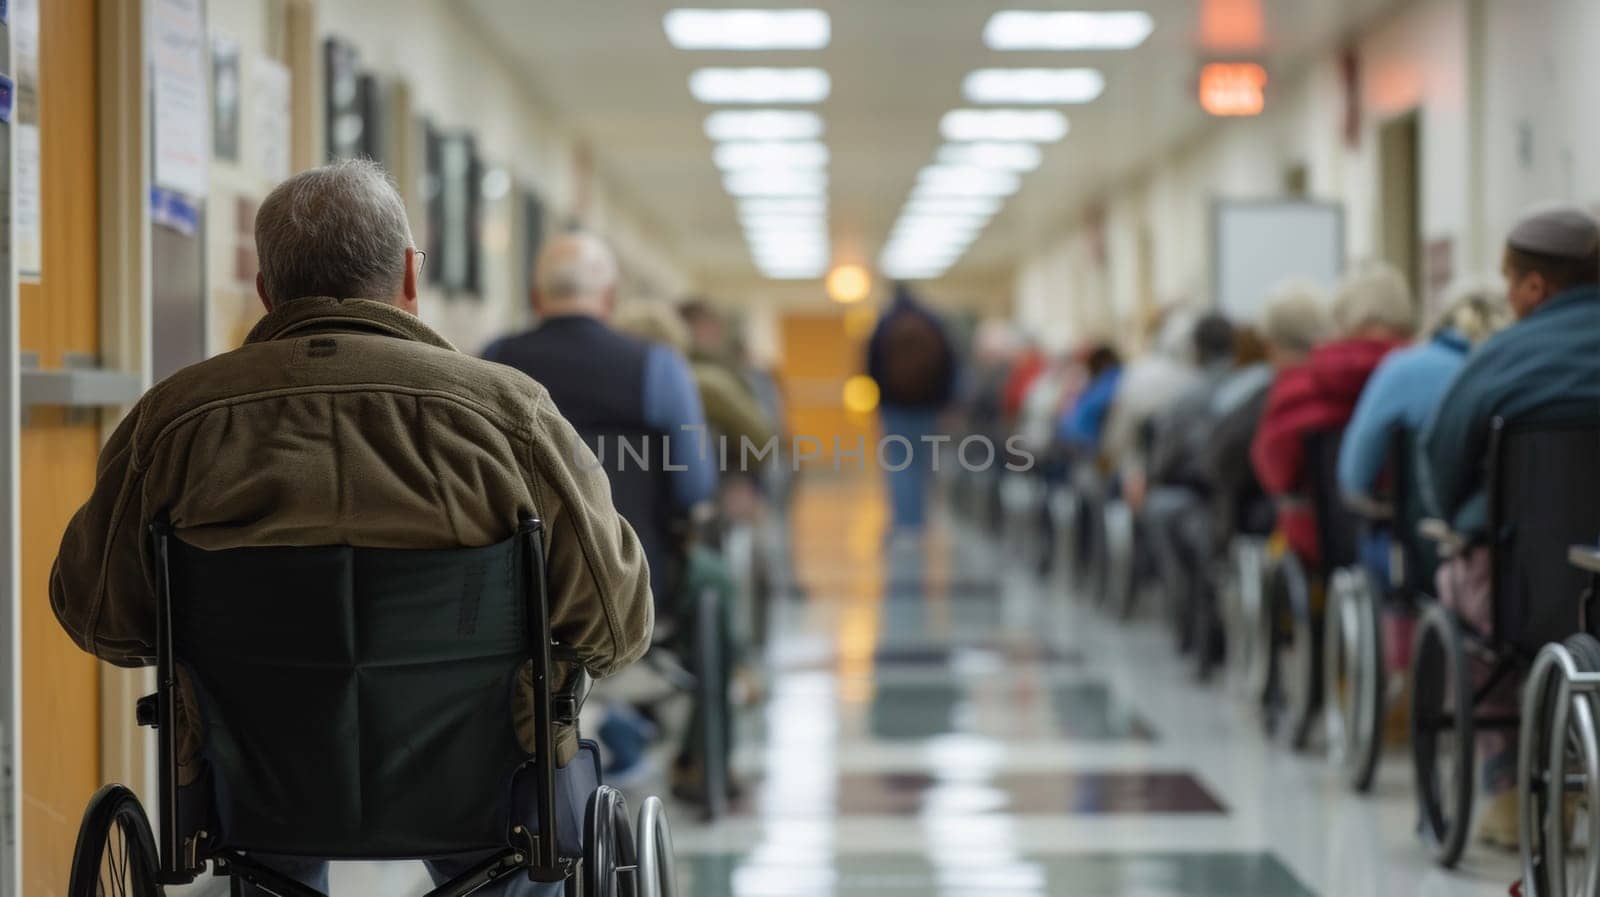 A long hallway with many people in wheelchairs and walking